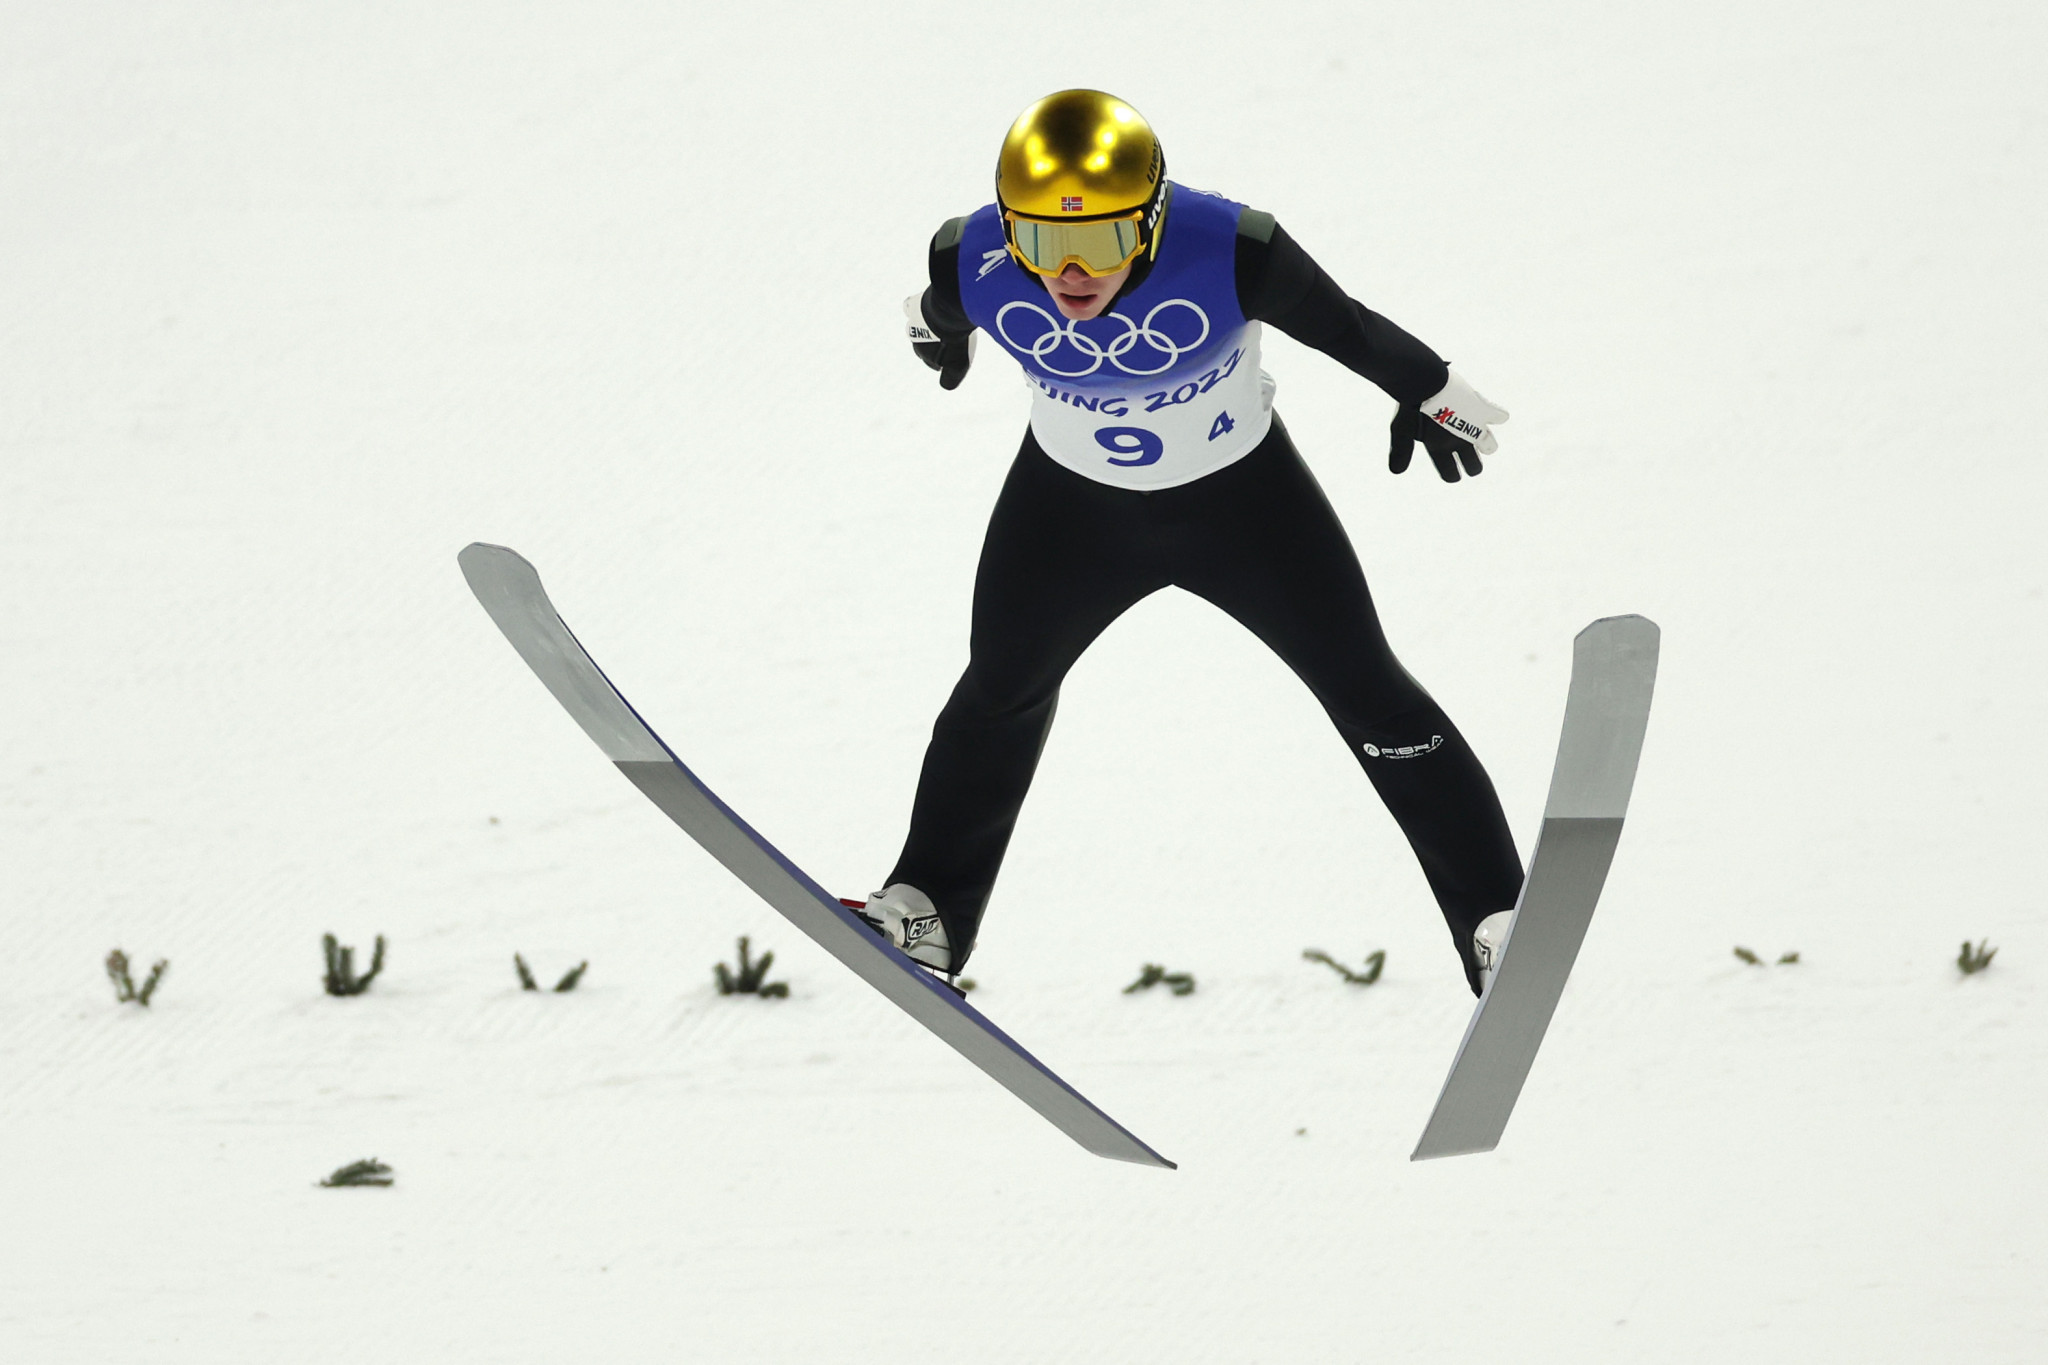 Olympic champions set to fly at World cup in Oberstdorf